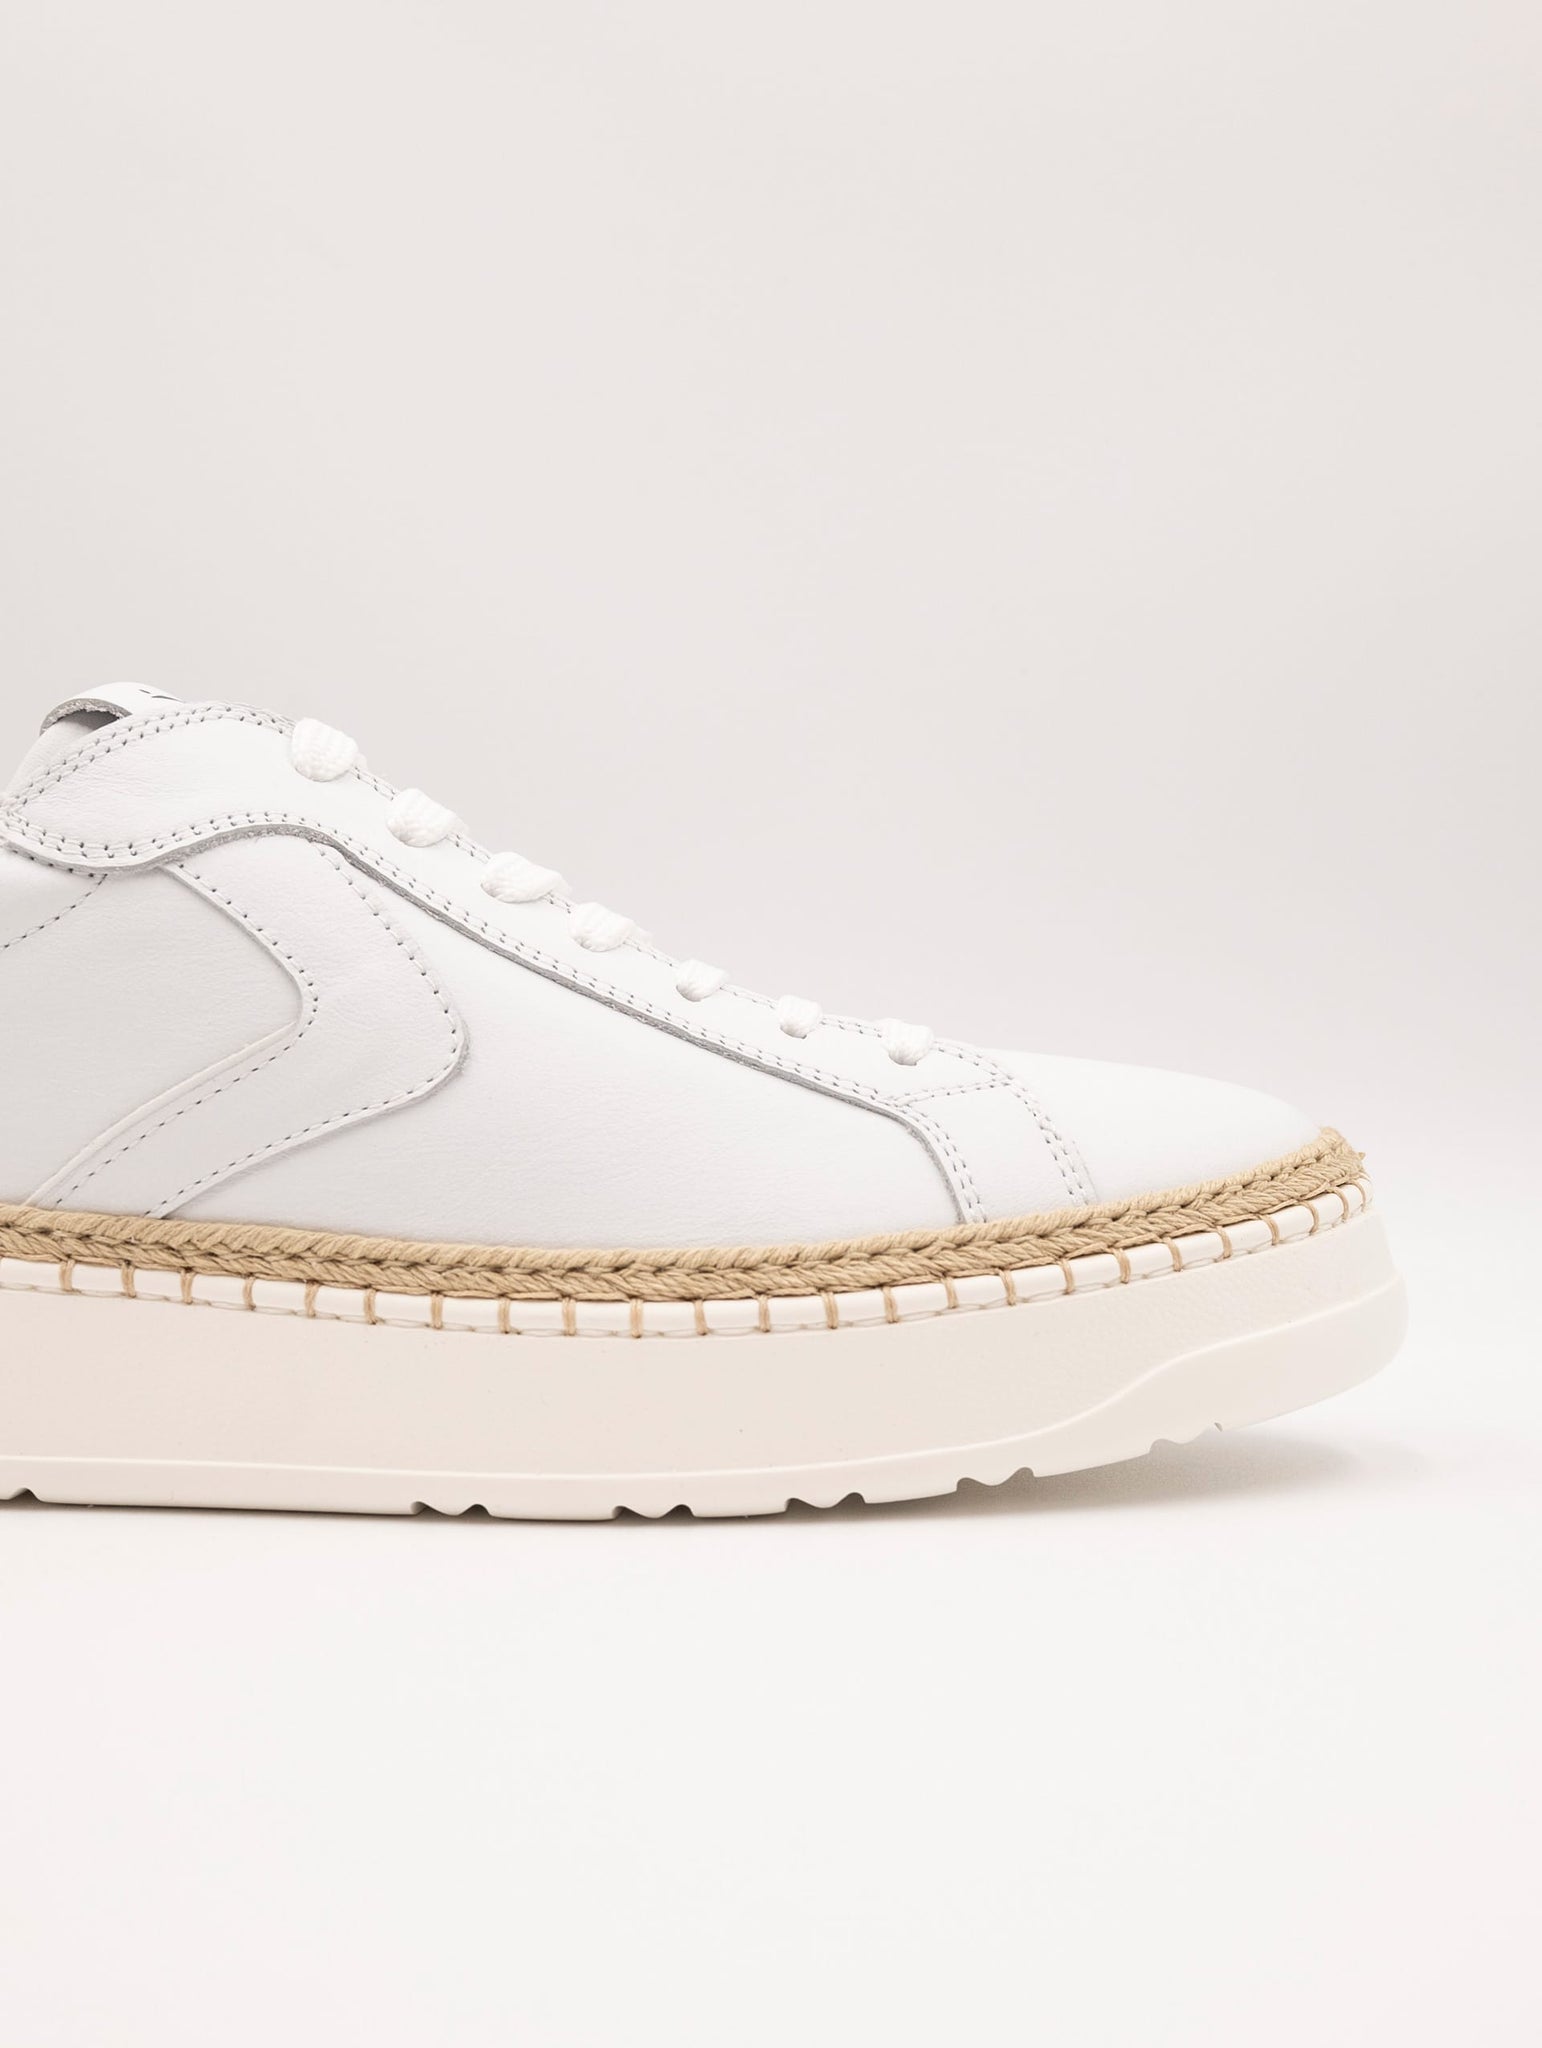 Sneakers Layton Voile Blanche In Pelle e Corda Bianca